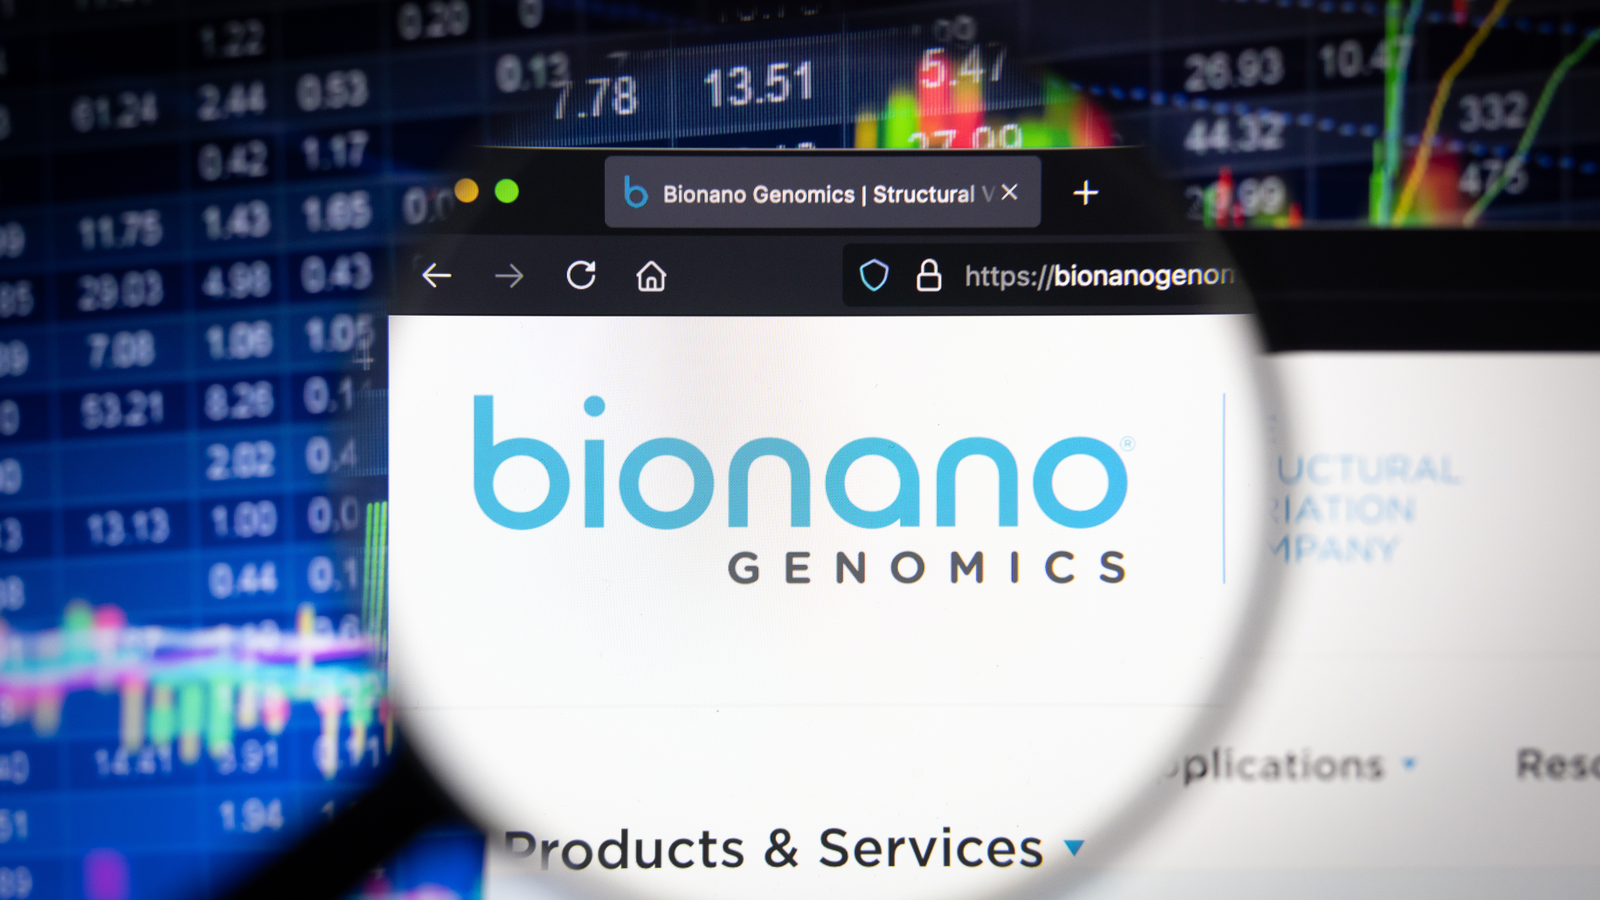 Bionano Genomics (BNGO stock) company logo on a website with blurry stock market developments in the background